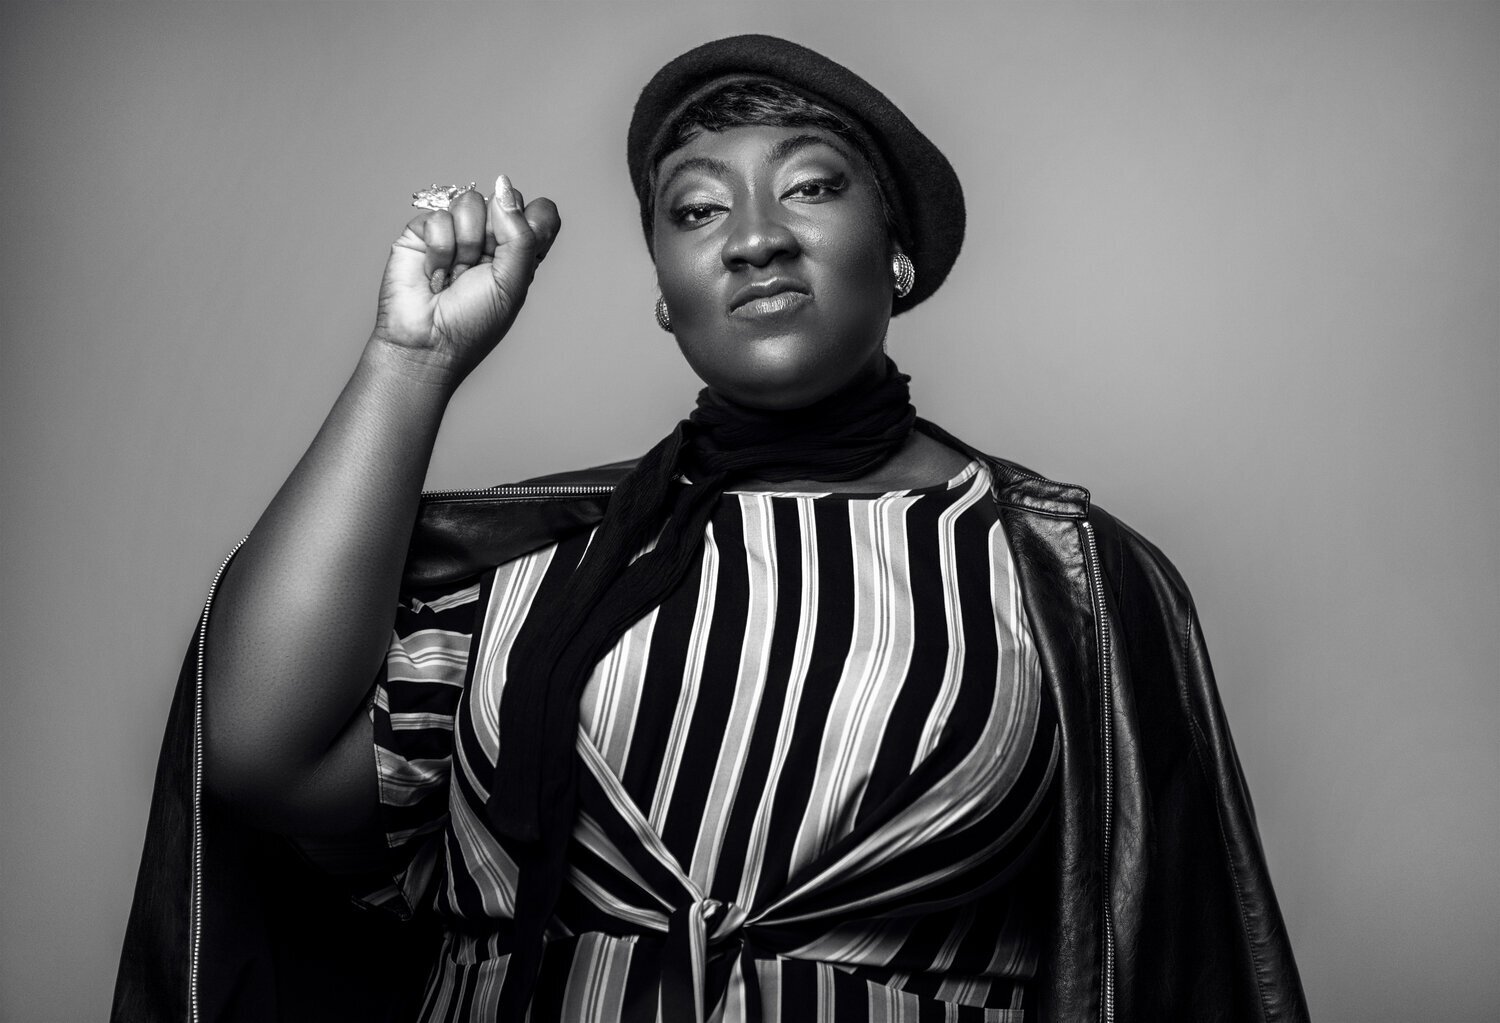 Living in our full humanity - a&nbsp; beautiful interview with founder of UK Black Pride Lady Phyll